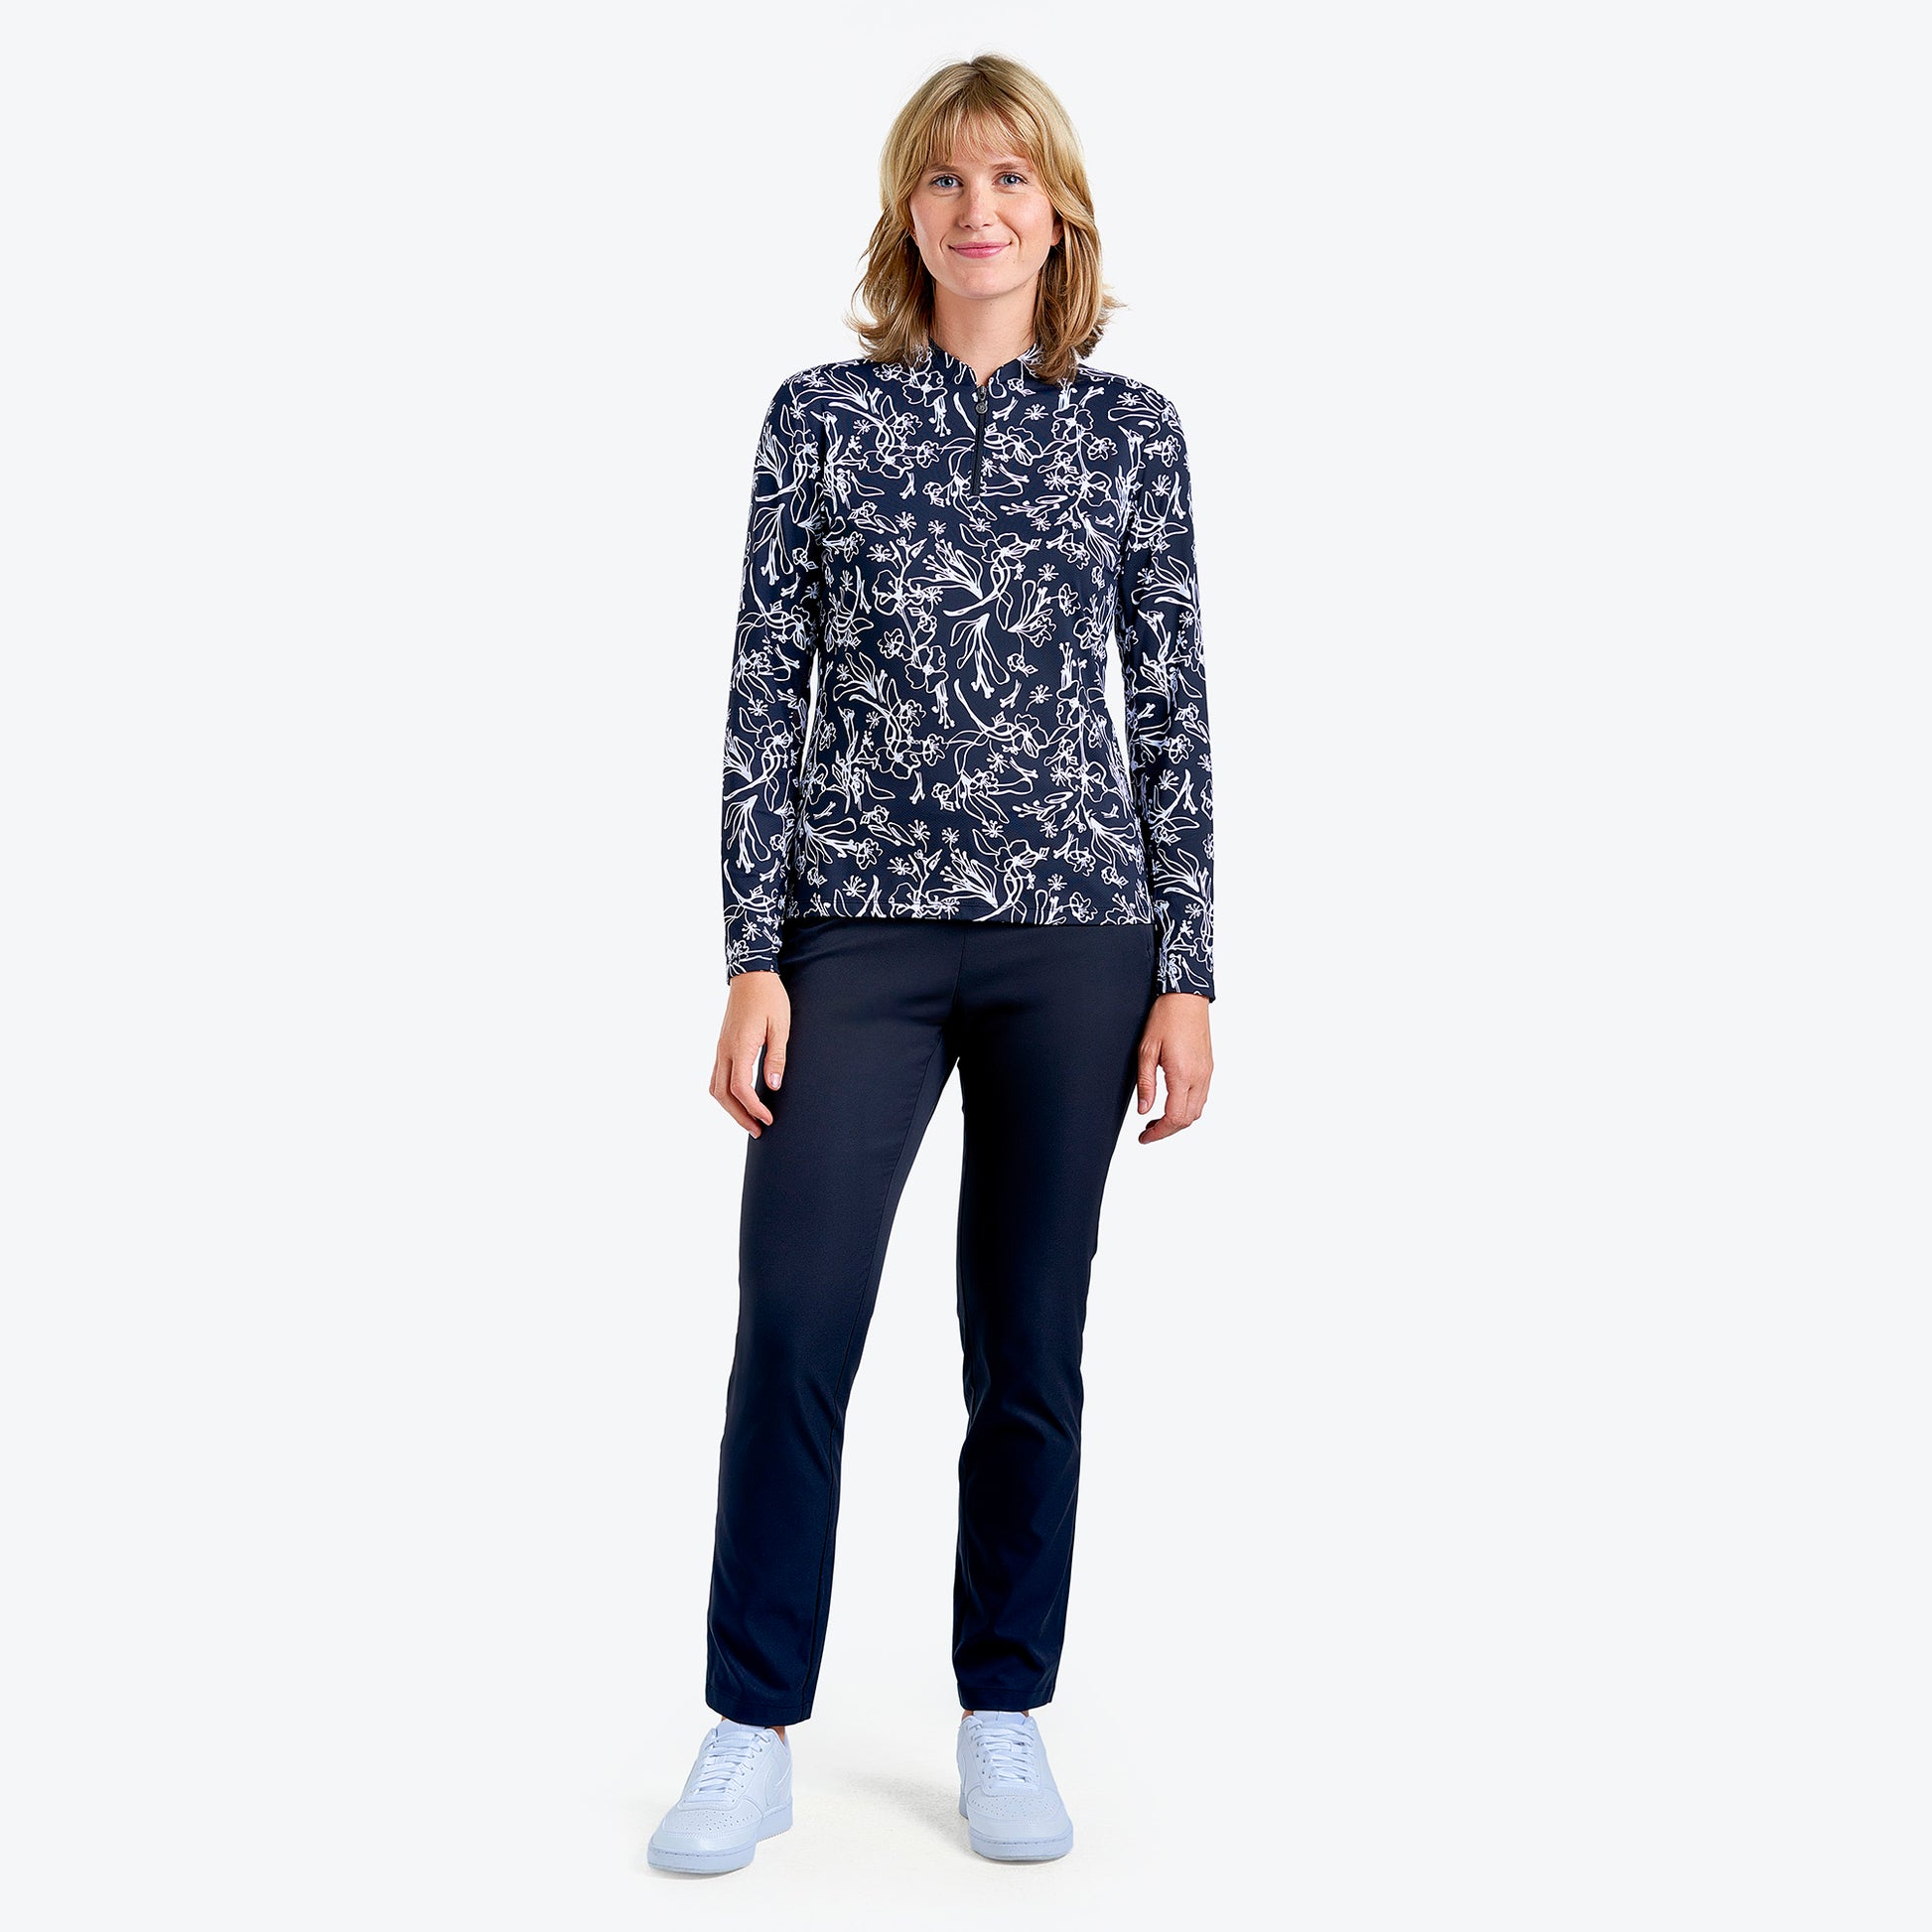 Nivo Ladies Long Sleeve Golf Polo in Black & White Abstract Floral Print 